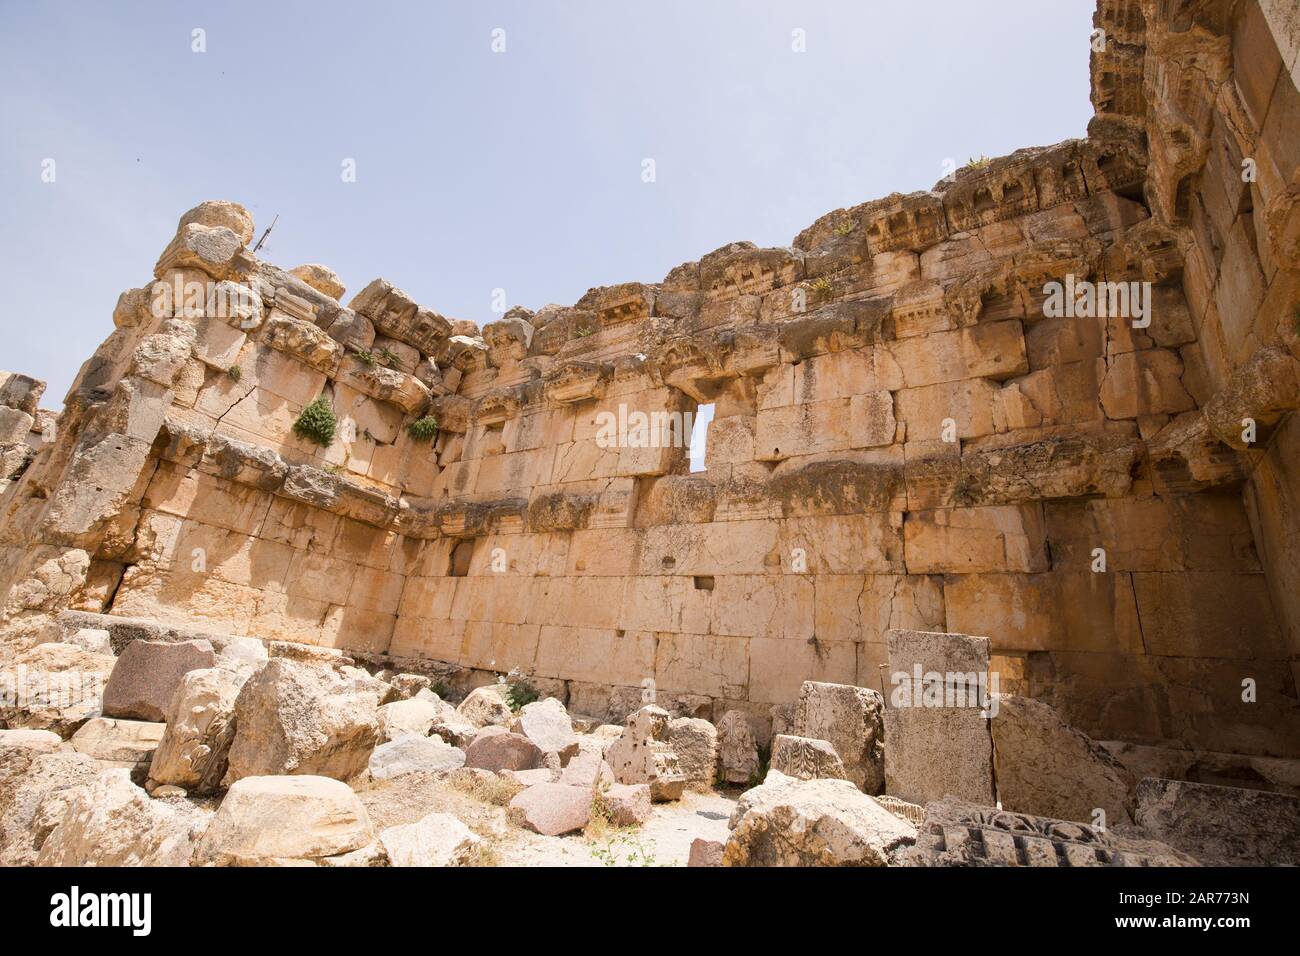 The Great Court. The ruins of the Roman city of Heliopolis or Baalbek in the Beqaa Valley. Baalbek, Lebanon - June, 2019 Stock Photo